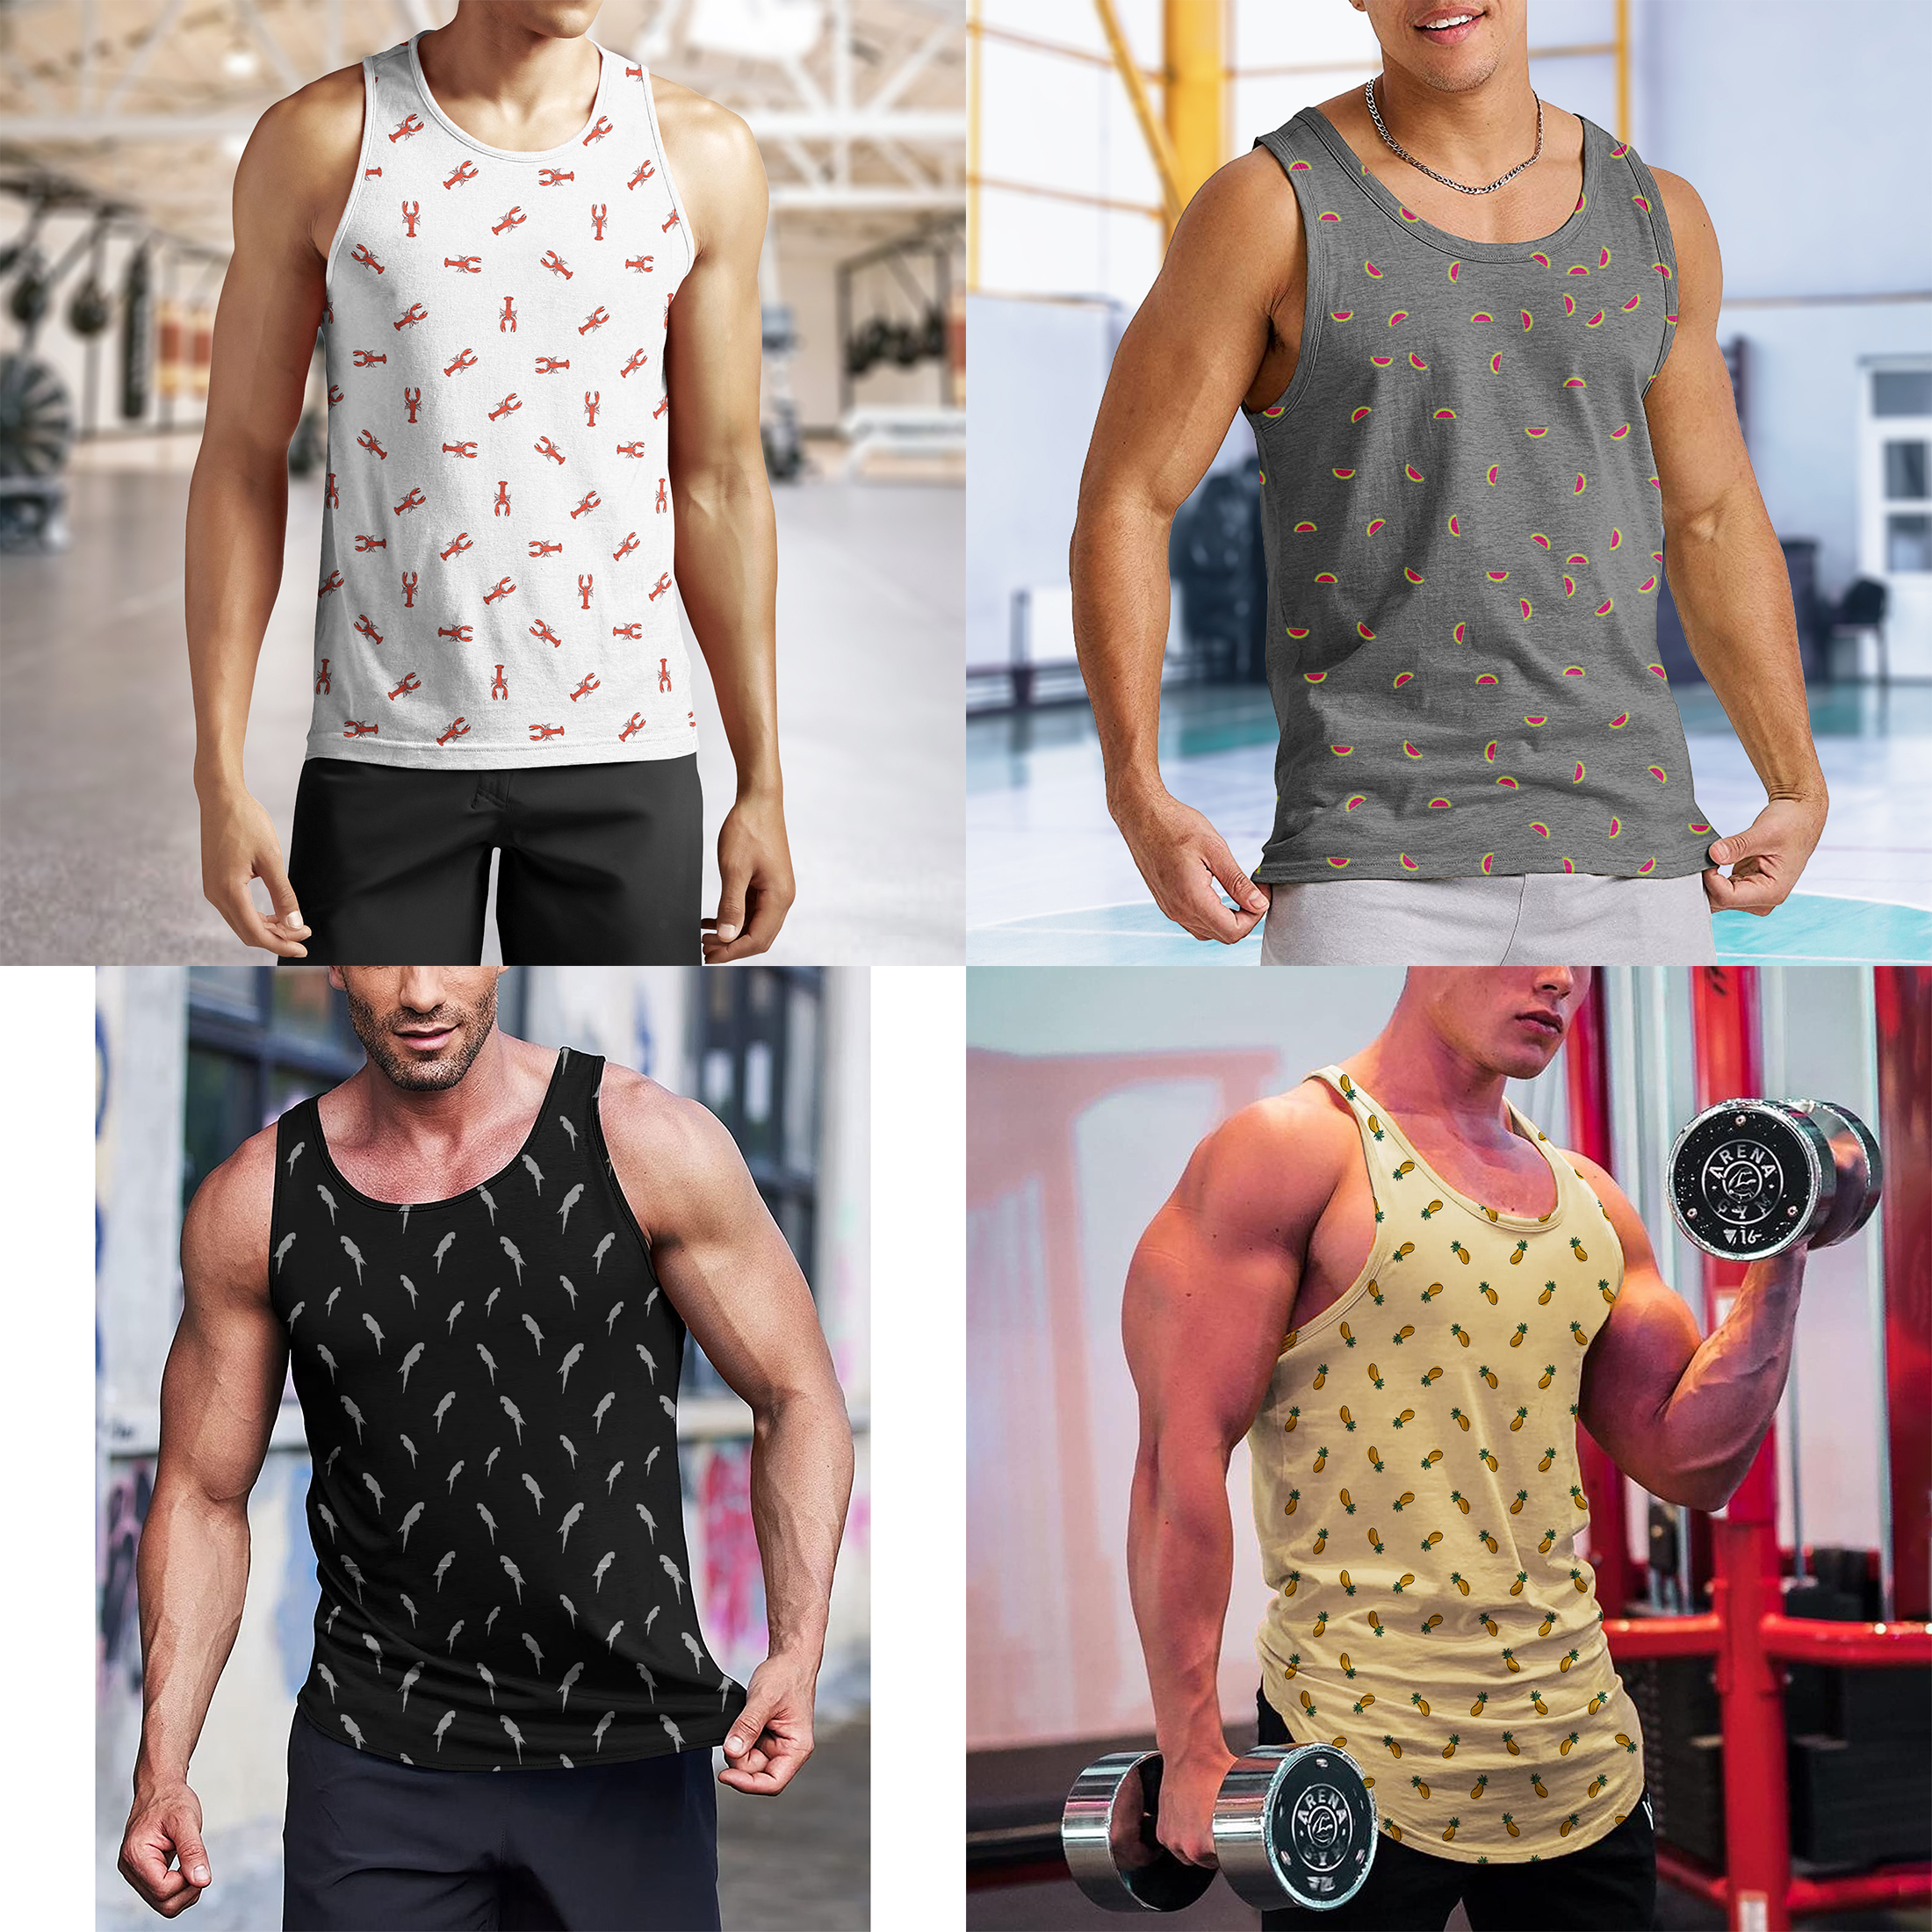 4-Pack Men's Muscle Tank Tops Active Athletic Crew Neck Moisture Wicking Quick Dry Breathable Sleeveless Fitness Shirts Gym Workout Tees - L